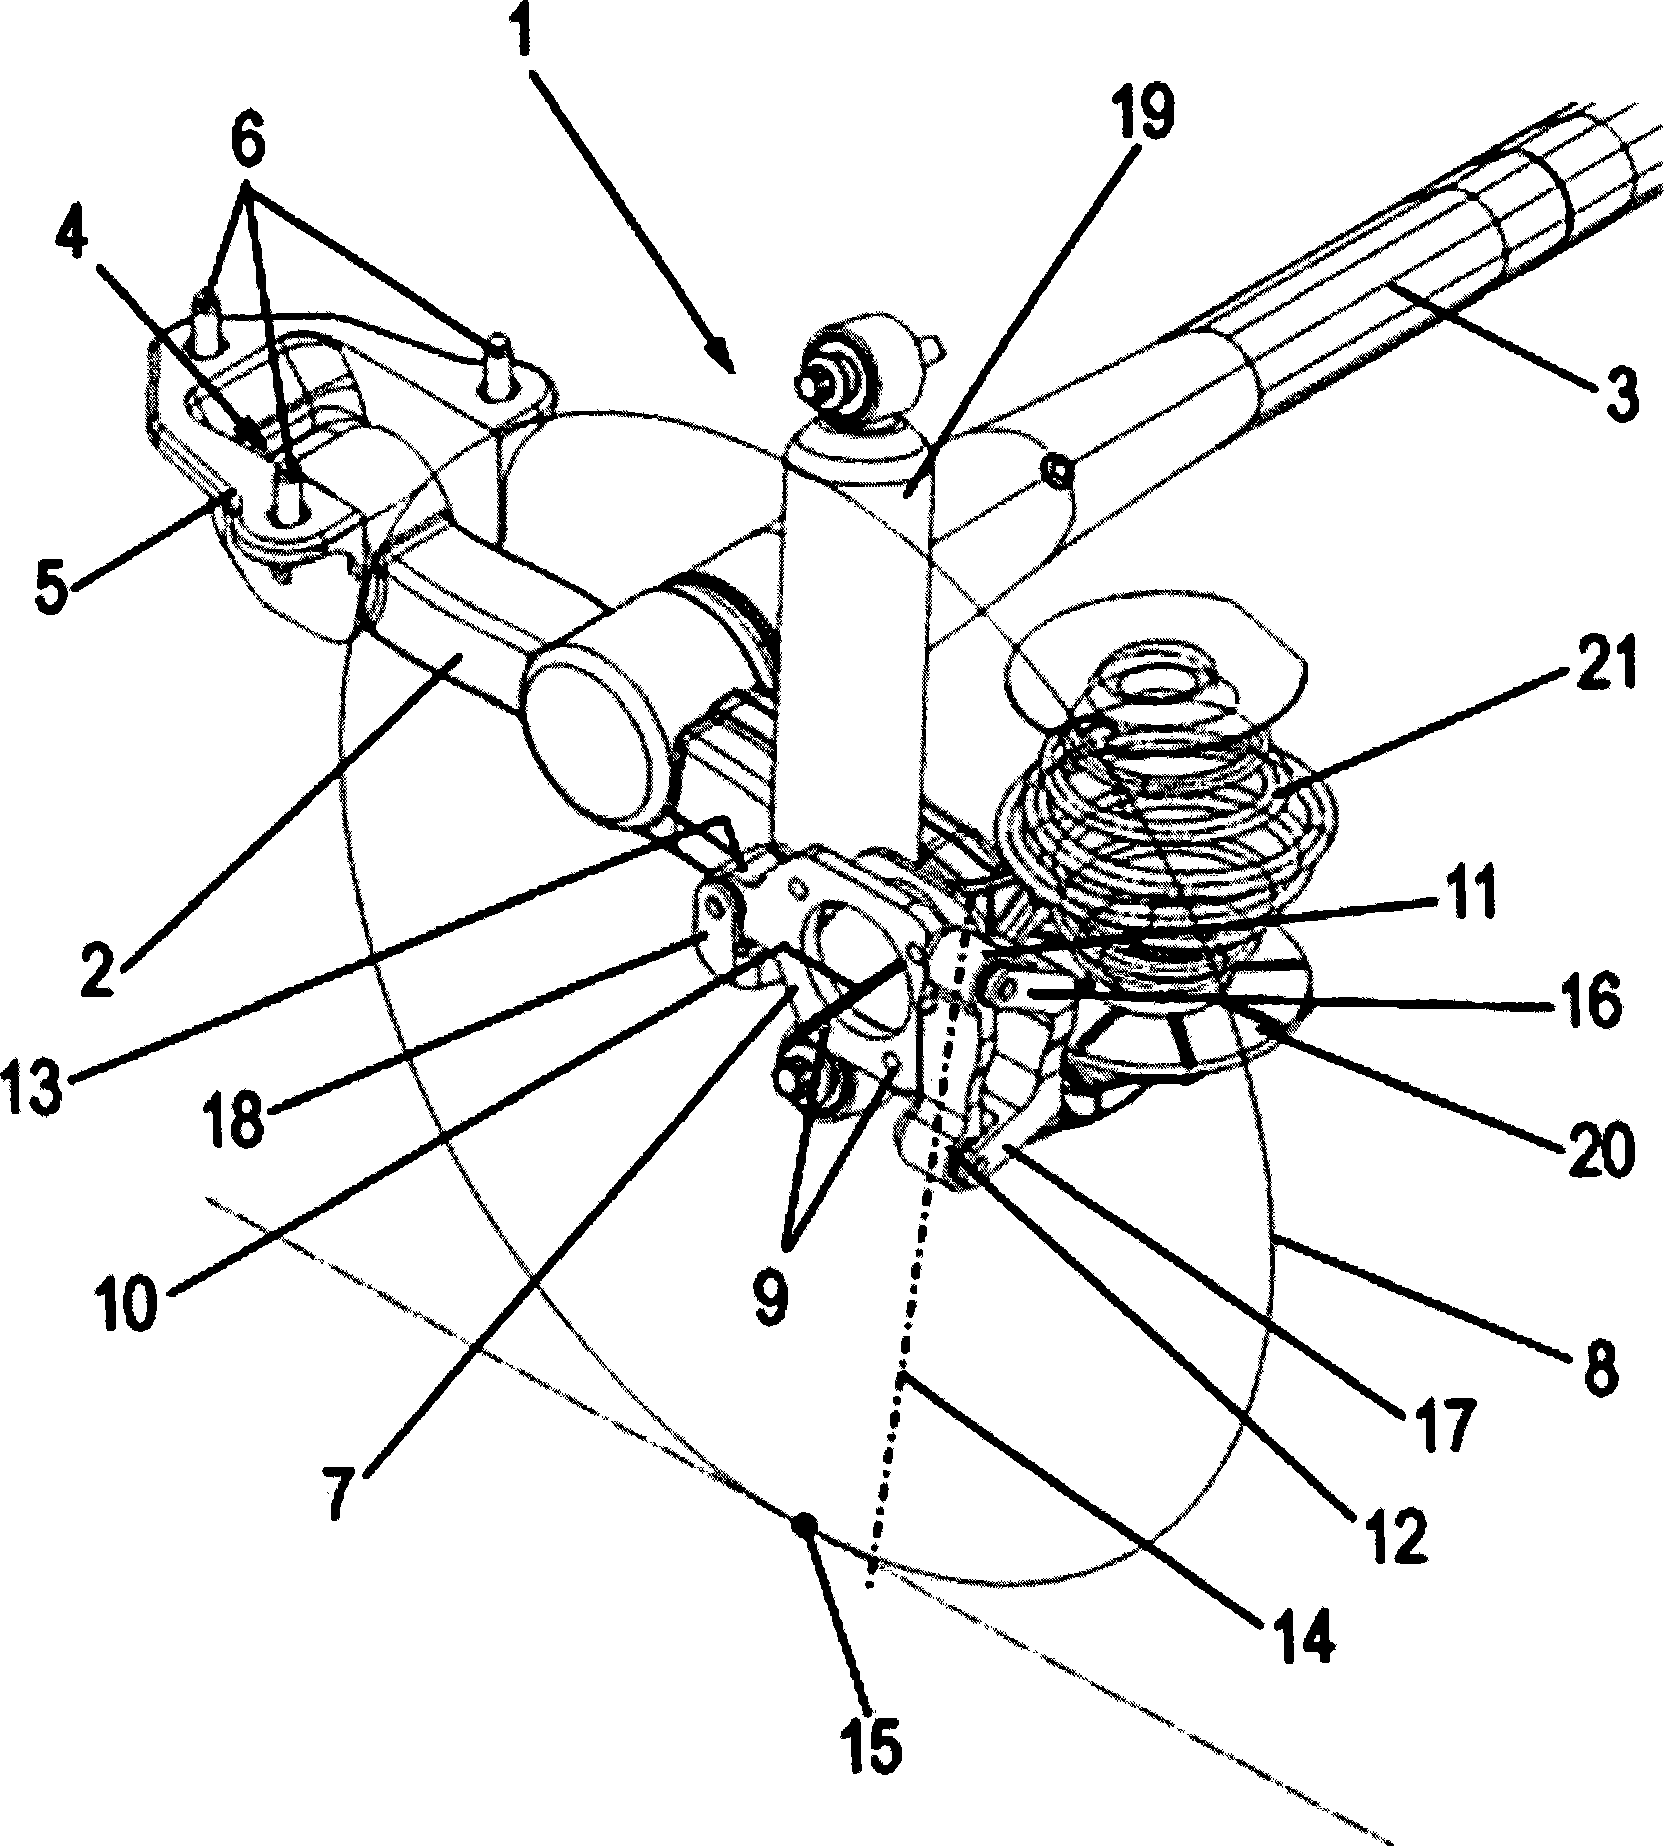 Twist-beam rear axle for a vehicle